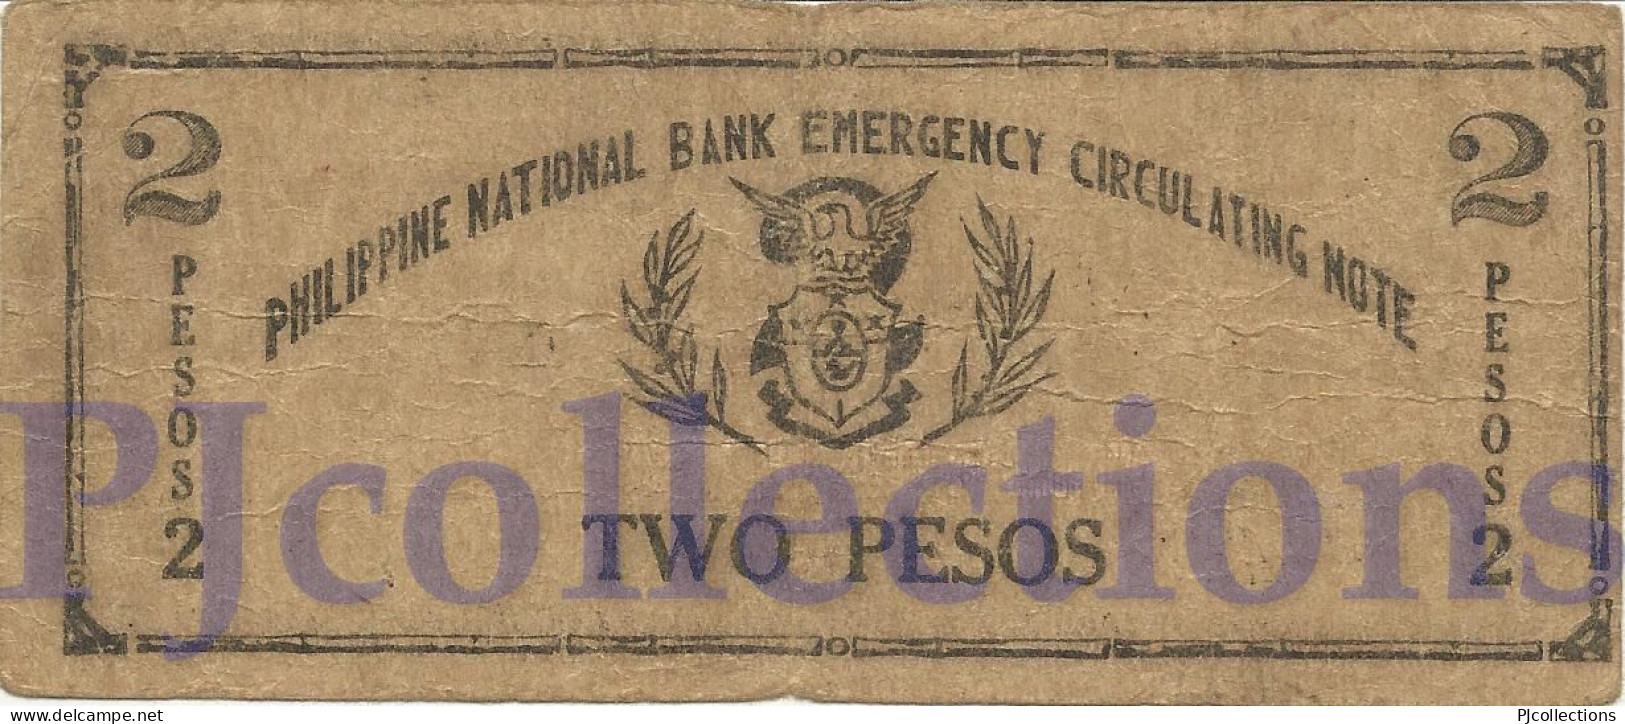 PHILIPPINES 2 PESOS 1942 PICK S577a FINE EMERGENCY NOTE - Philippines